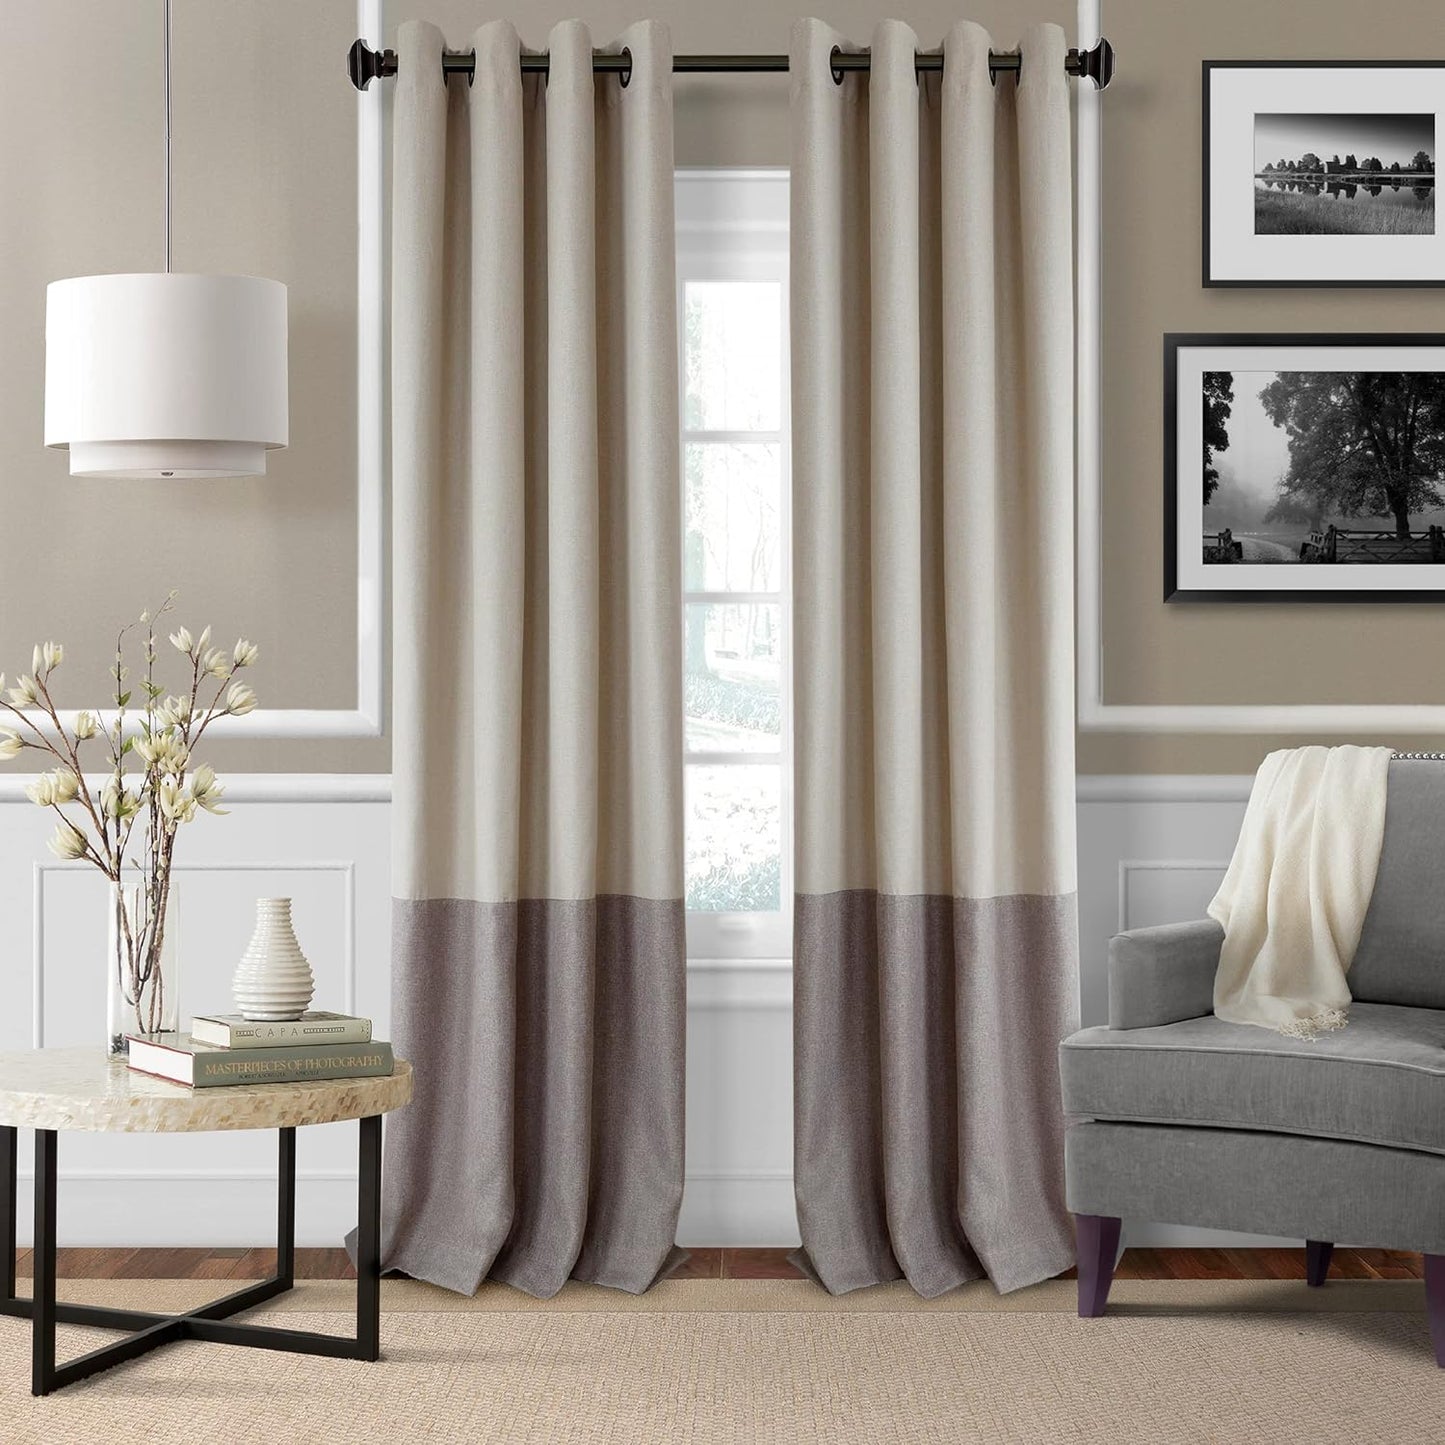 Elrene Home Fashions Braiden Color-Block Blackout Window Curtain, Single Panel, 52 in X 84 in (1 Panel), Navy  Elrene Home Fashions Linen 52" X 95" (1 Panel) 